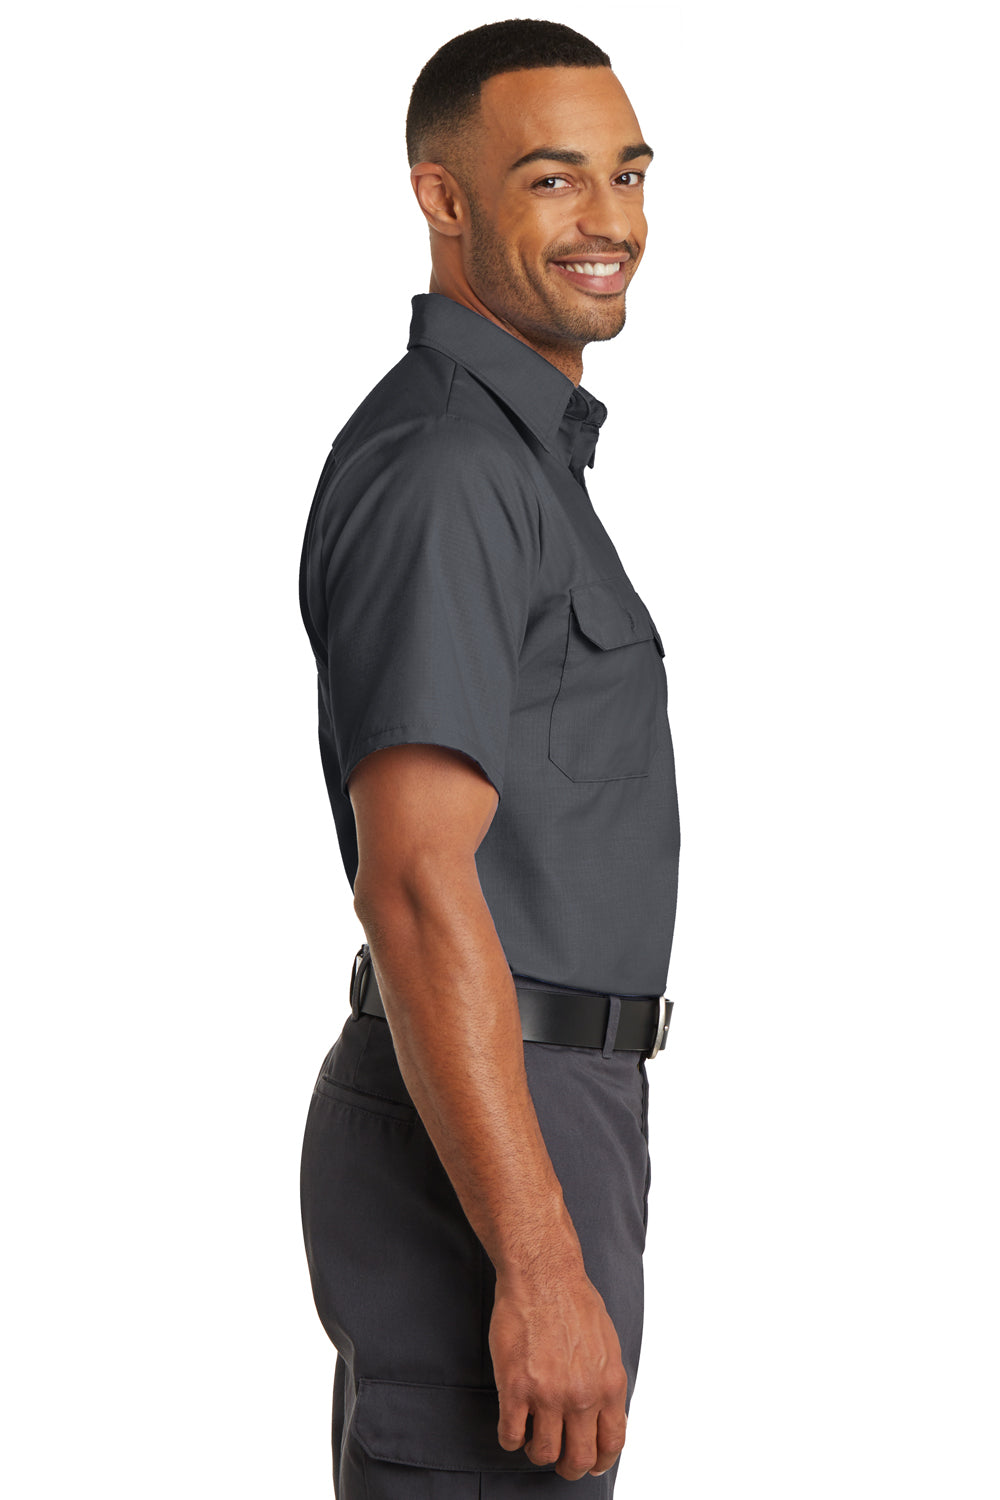 Red Kap SY60 Mens Moisture Wicking Short Sleeve Button Down Shirt w/ Double Pockets Charcoal Grey Side